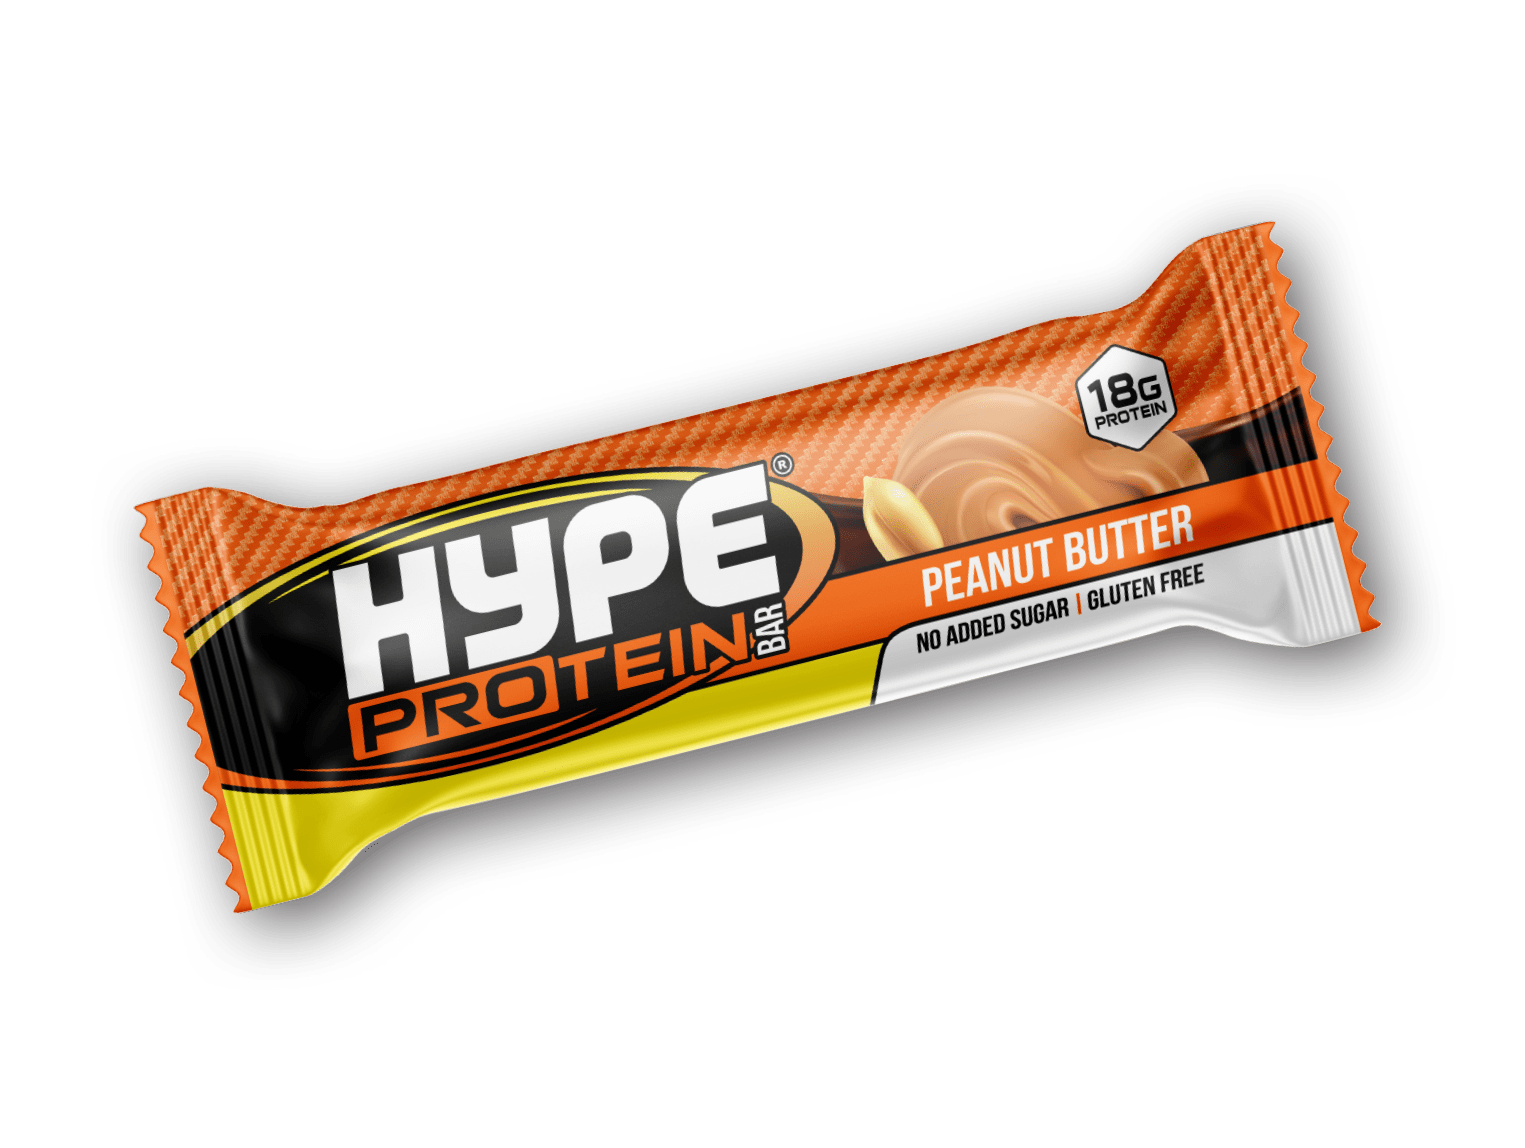 Hype’s protein bar, “peanut butter” flavoured.